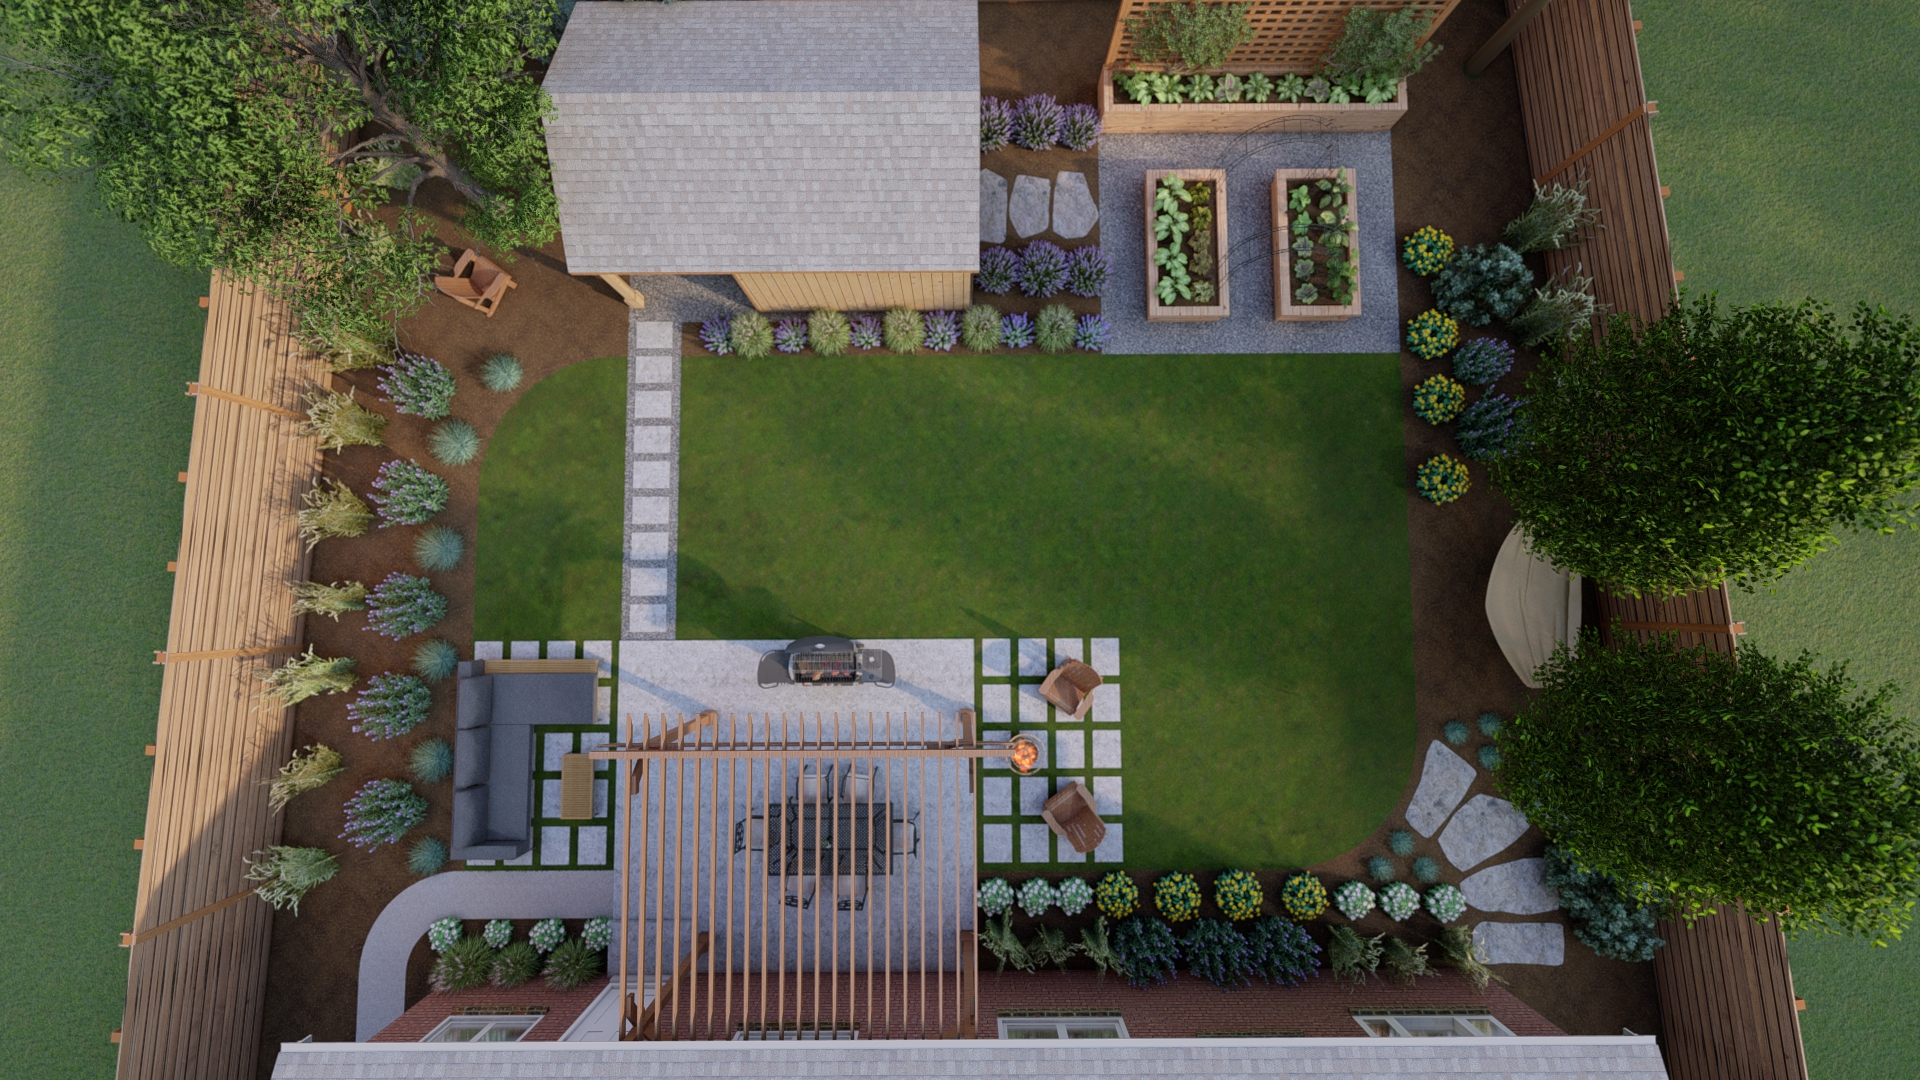 Aerial look at a backyard with many features including multiple garden areas